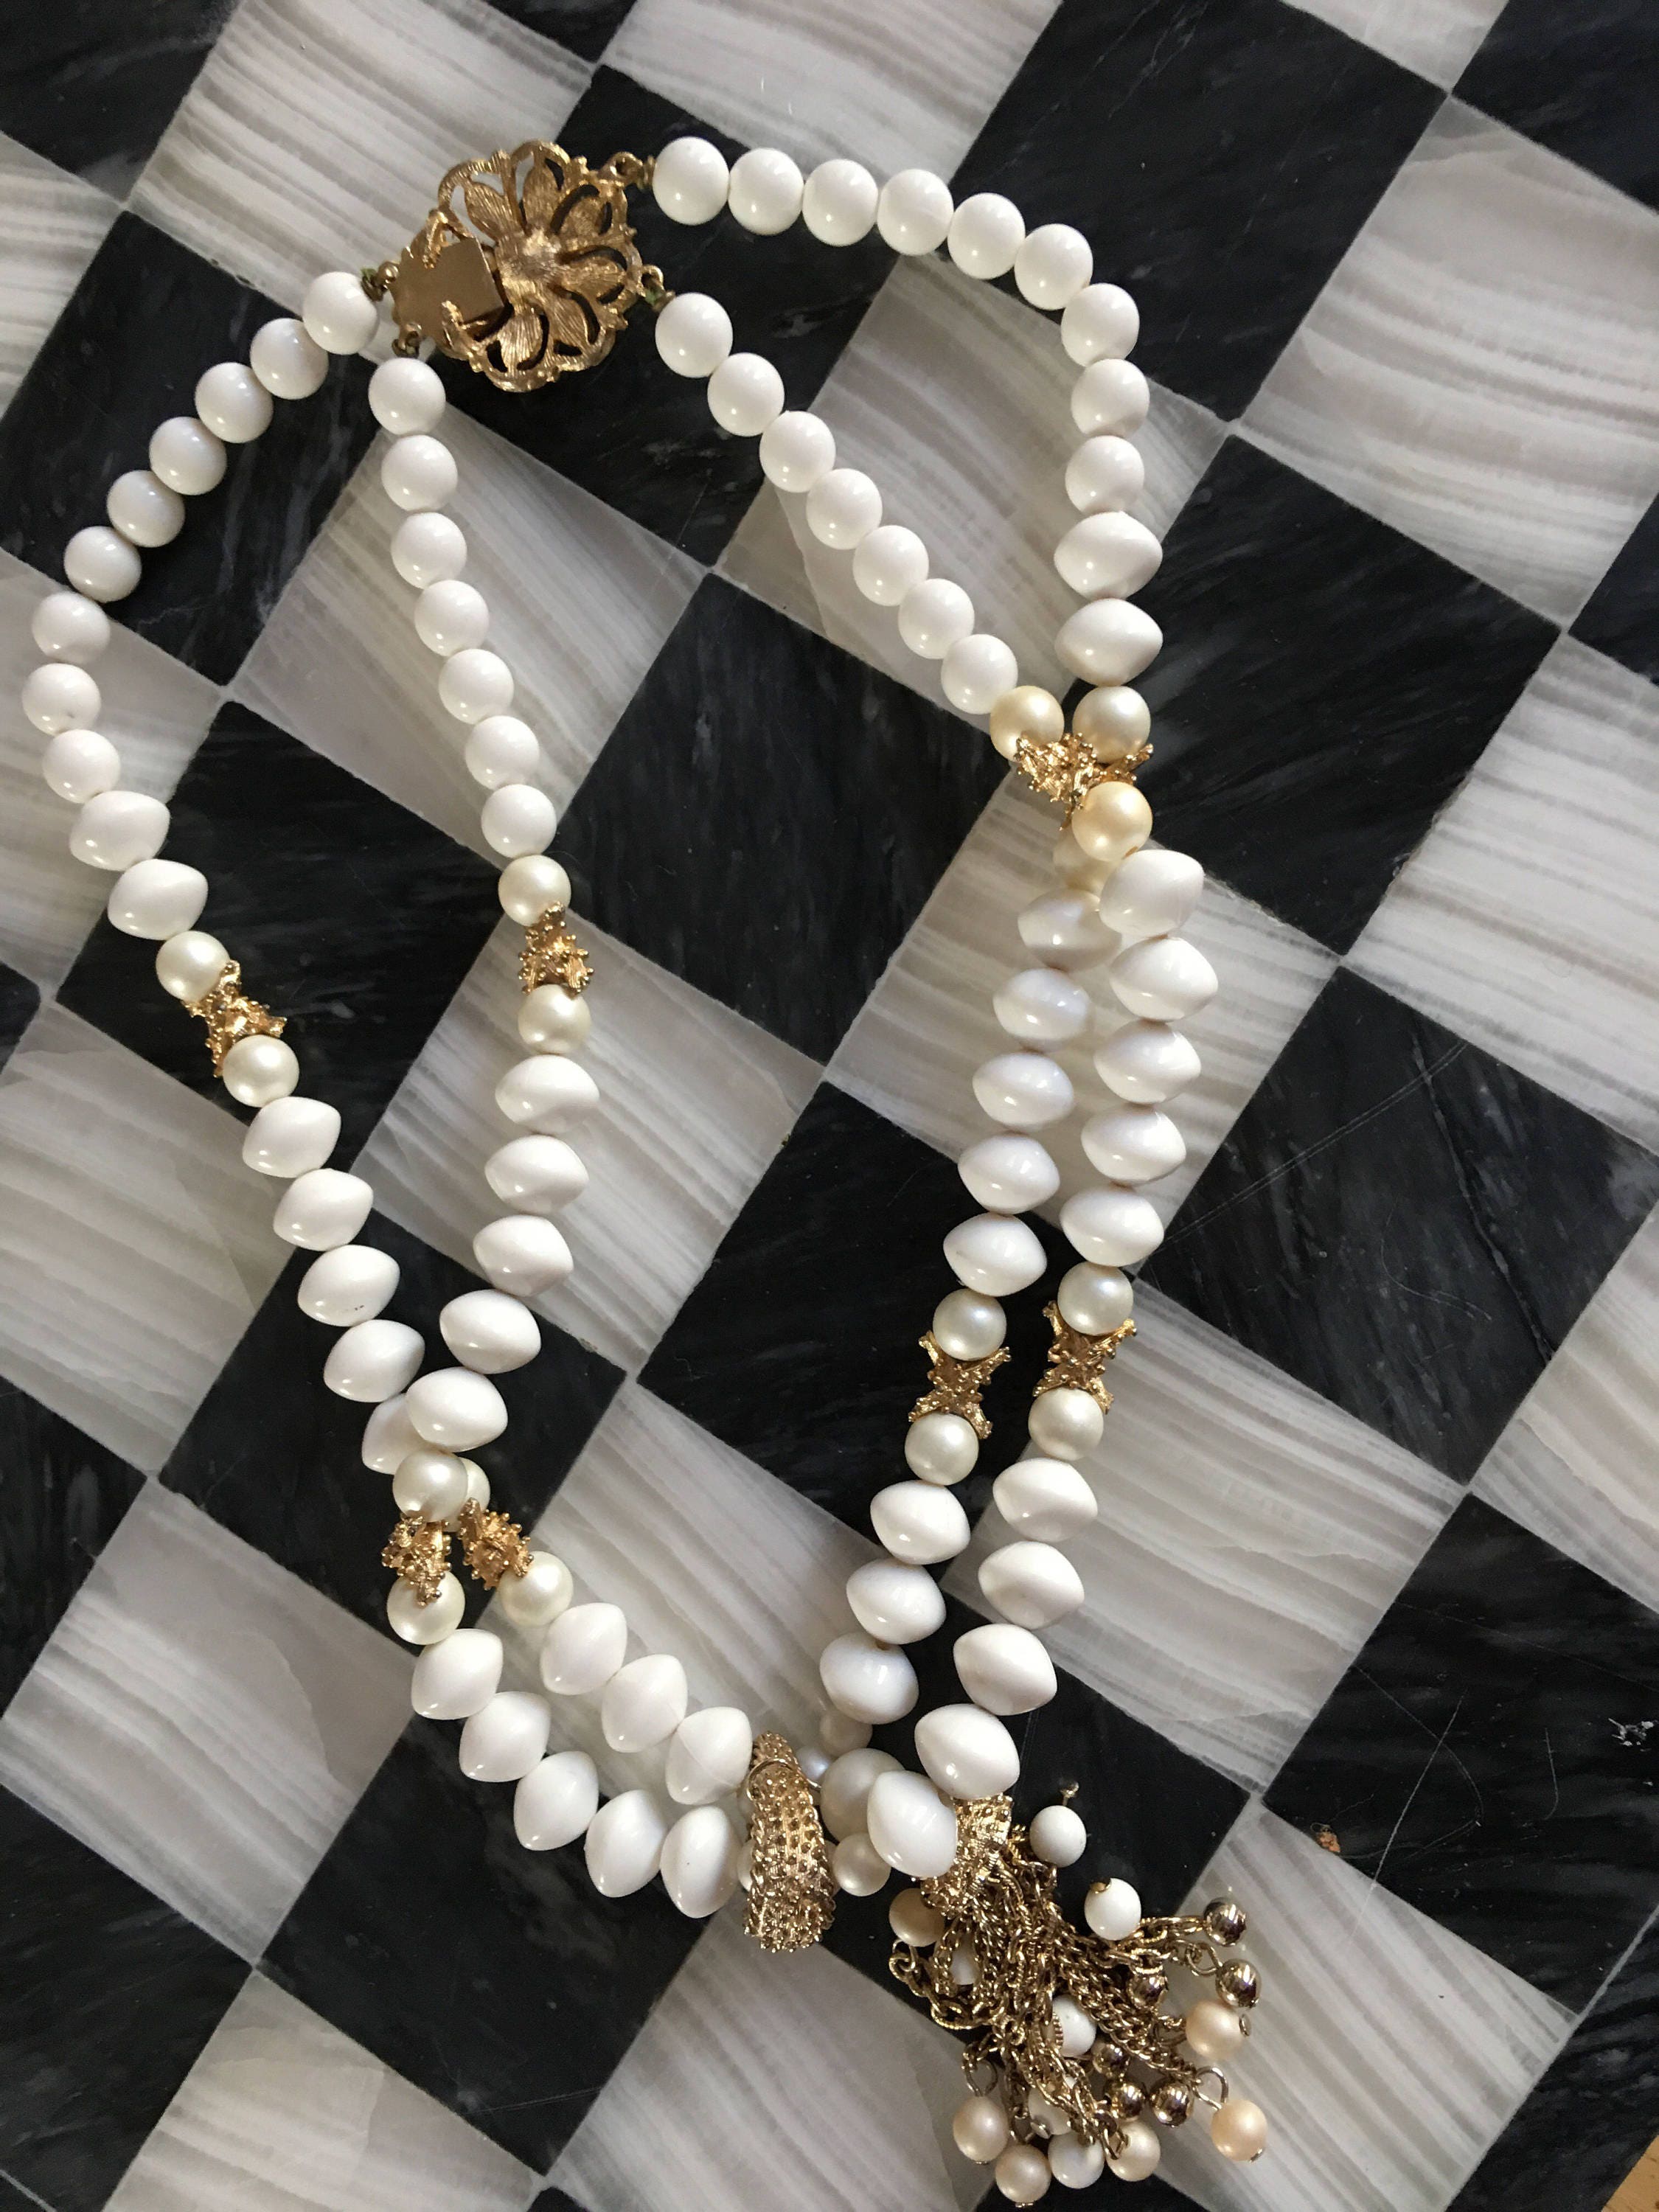 Vintage white beads & gold chains groovy Mod 60's gogo outasight choker ...